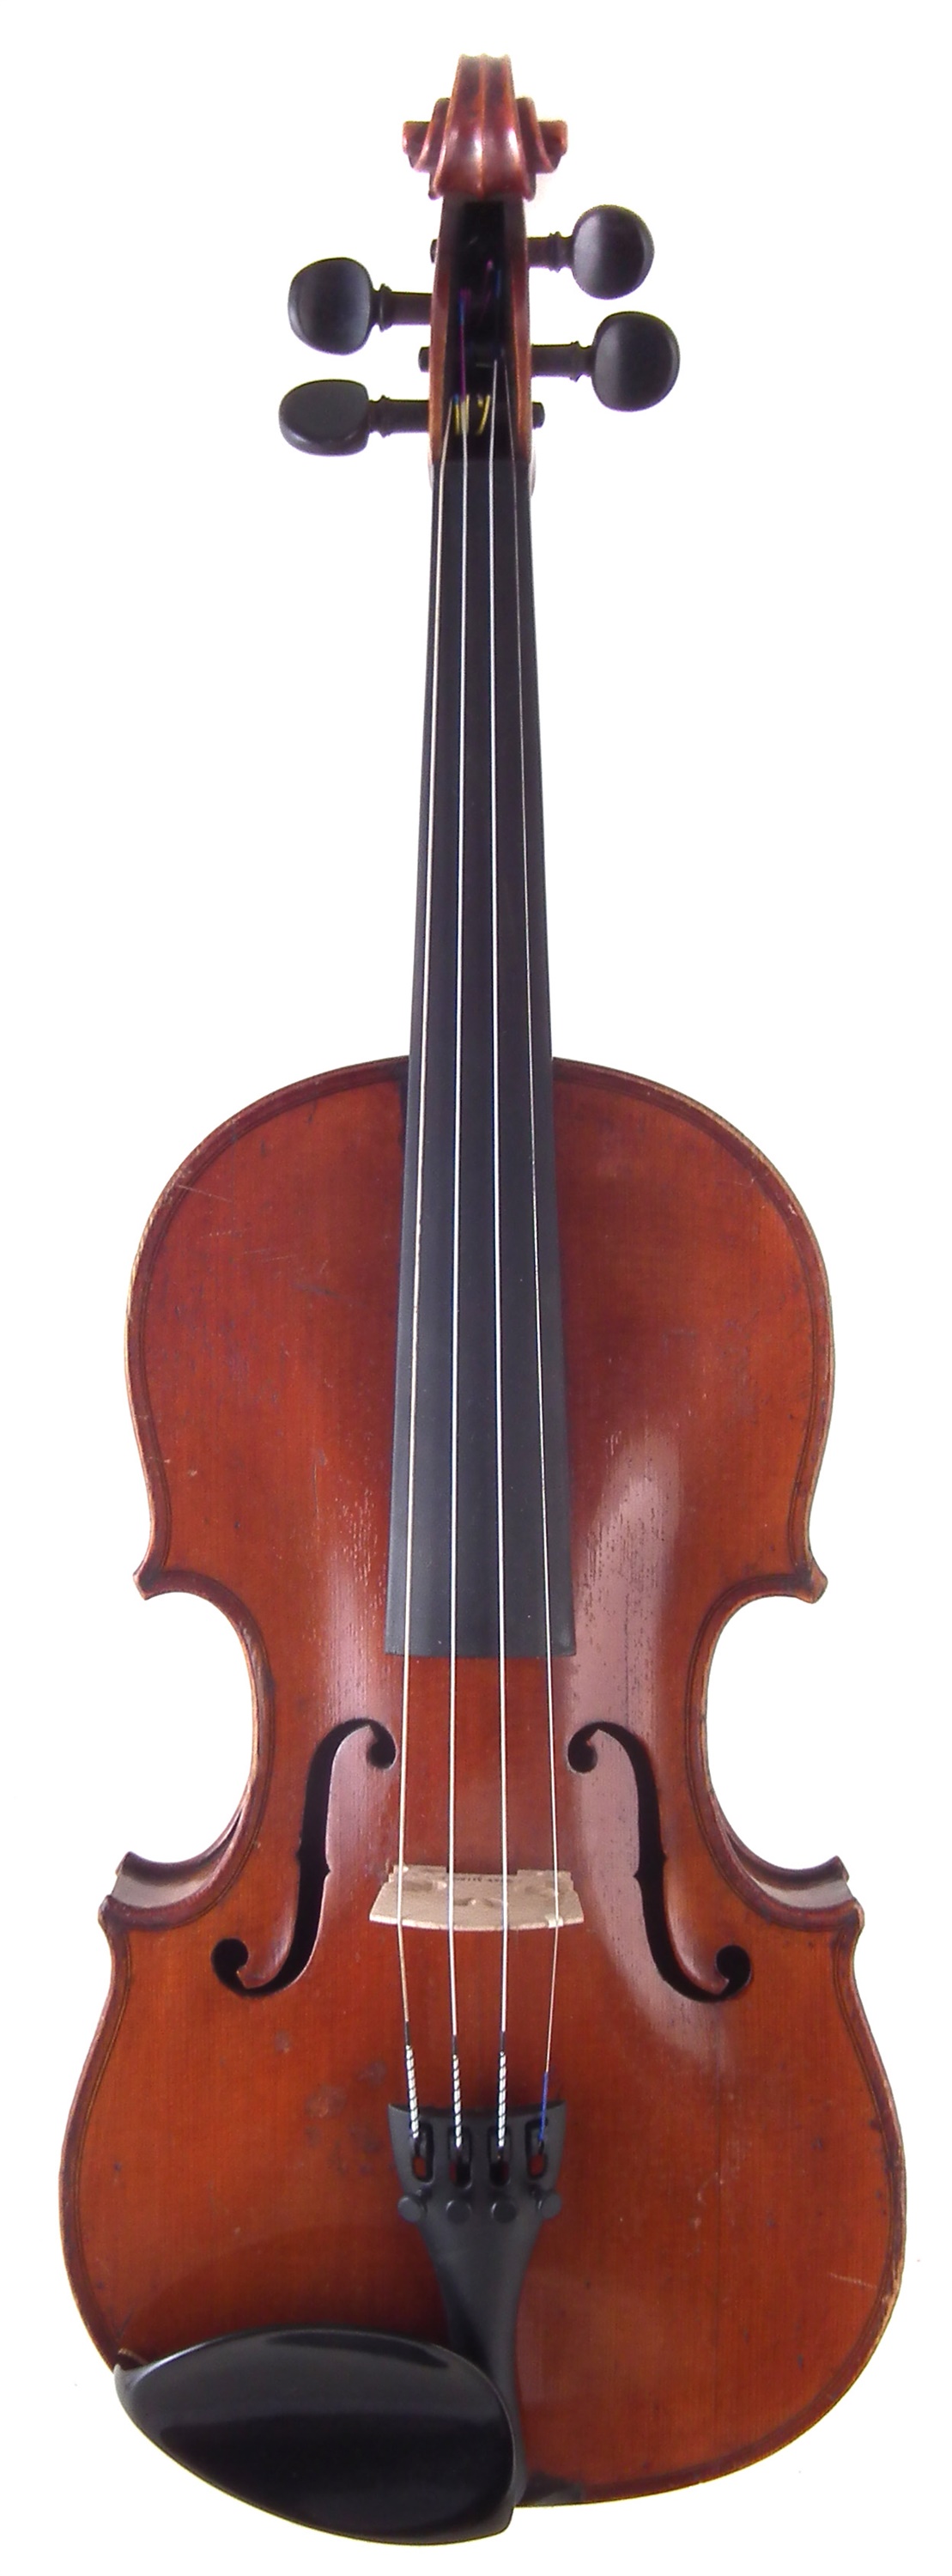 Schmidt violin with NS bow and case.